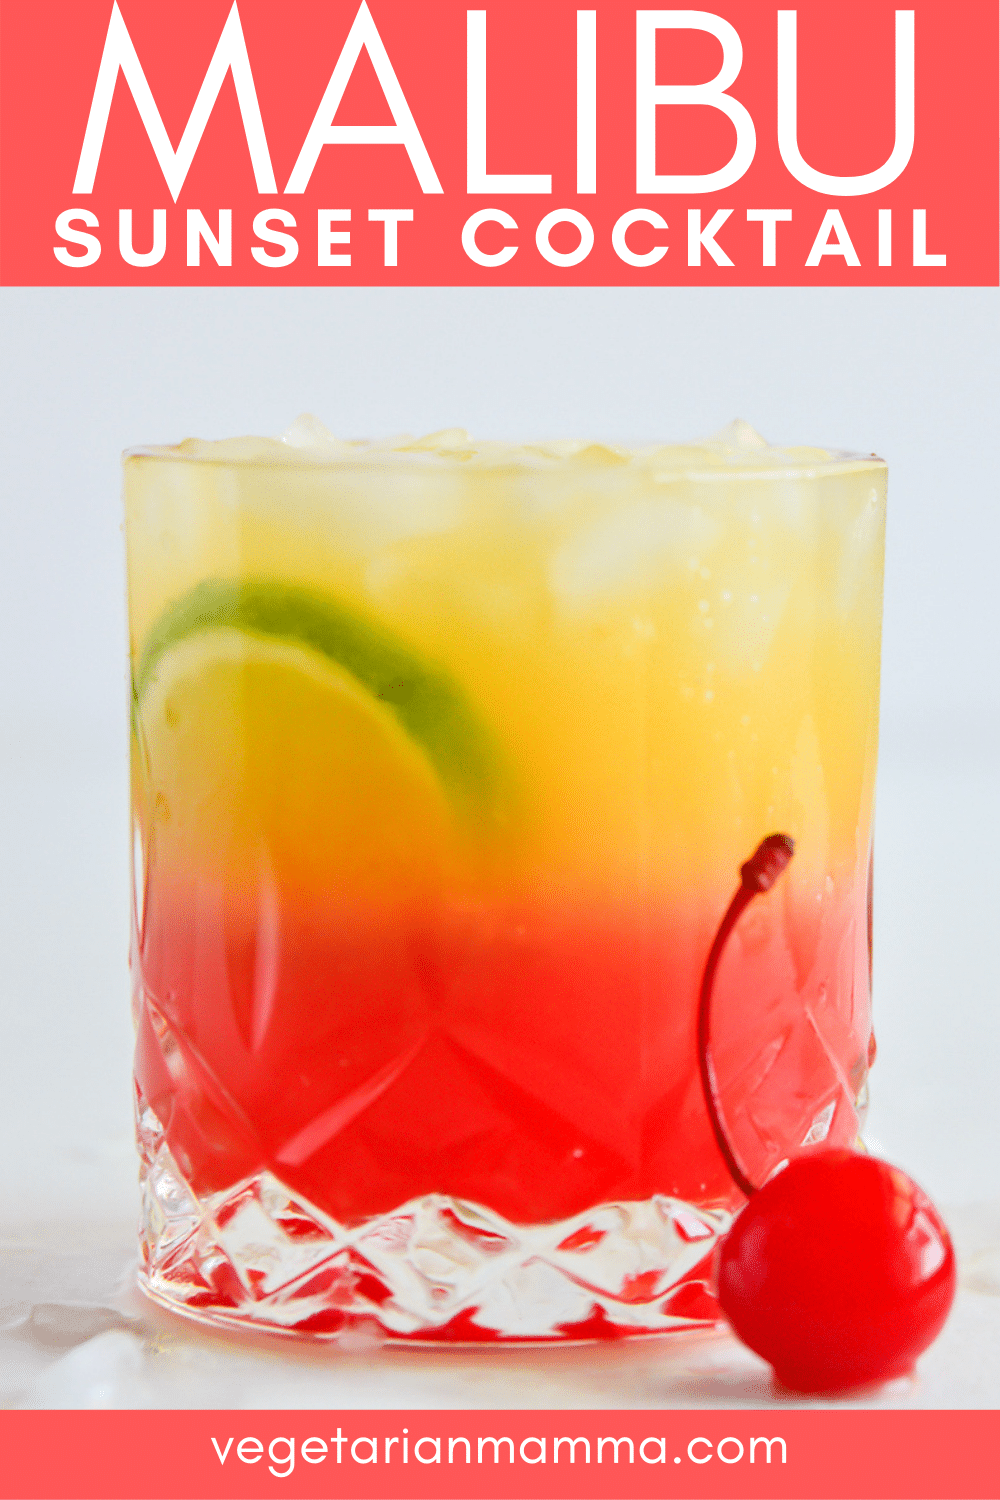 Malibu Sunset is a refreshing, delicious, and beautiful cocktail that is super easy to make! It is the perfect fruity, tropical drink for any time of year.